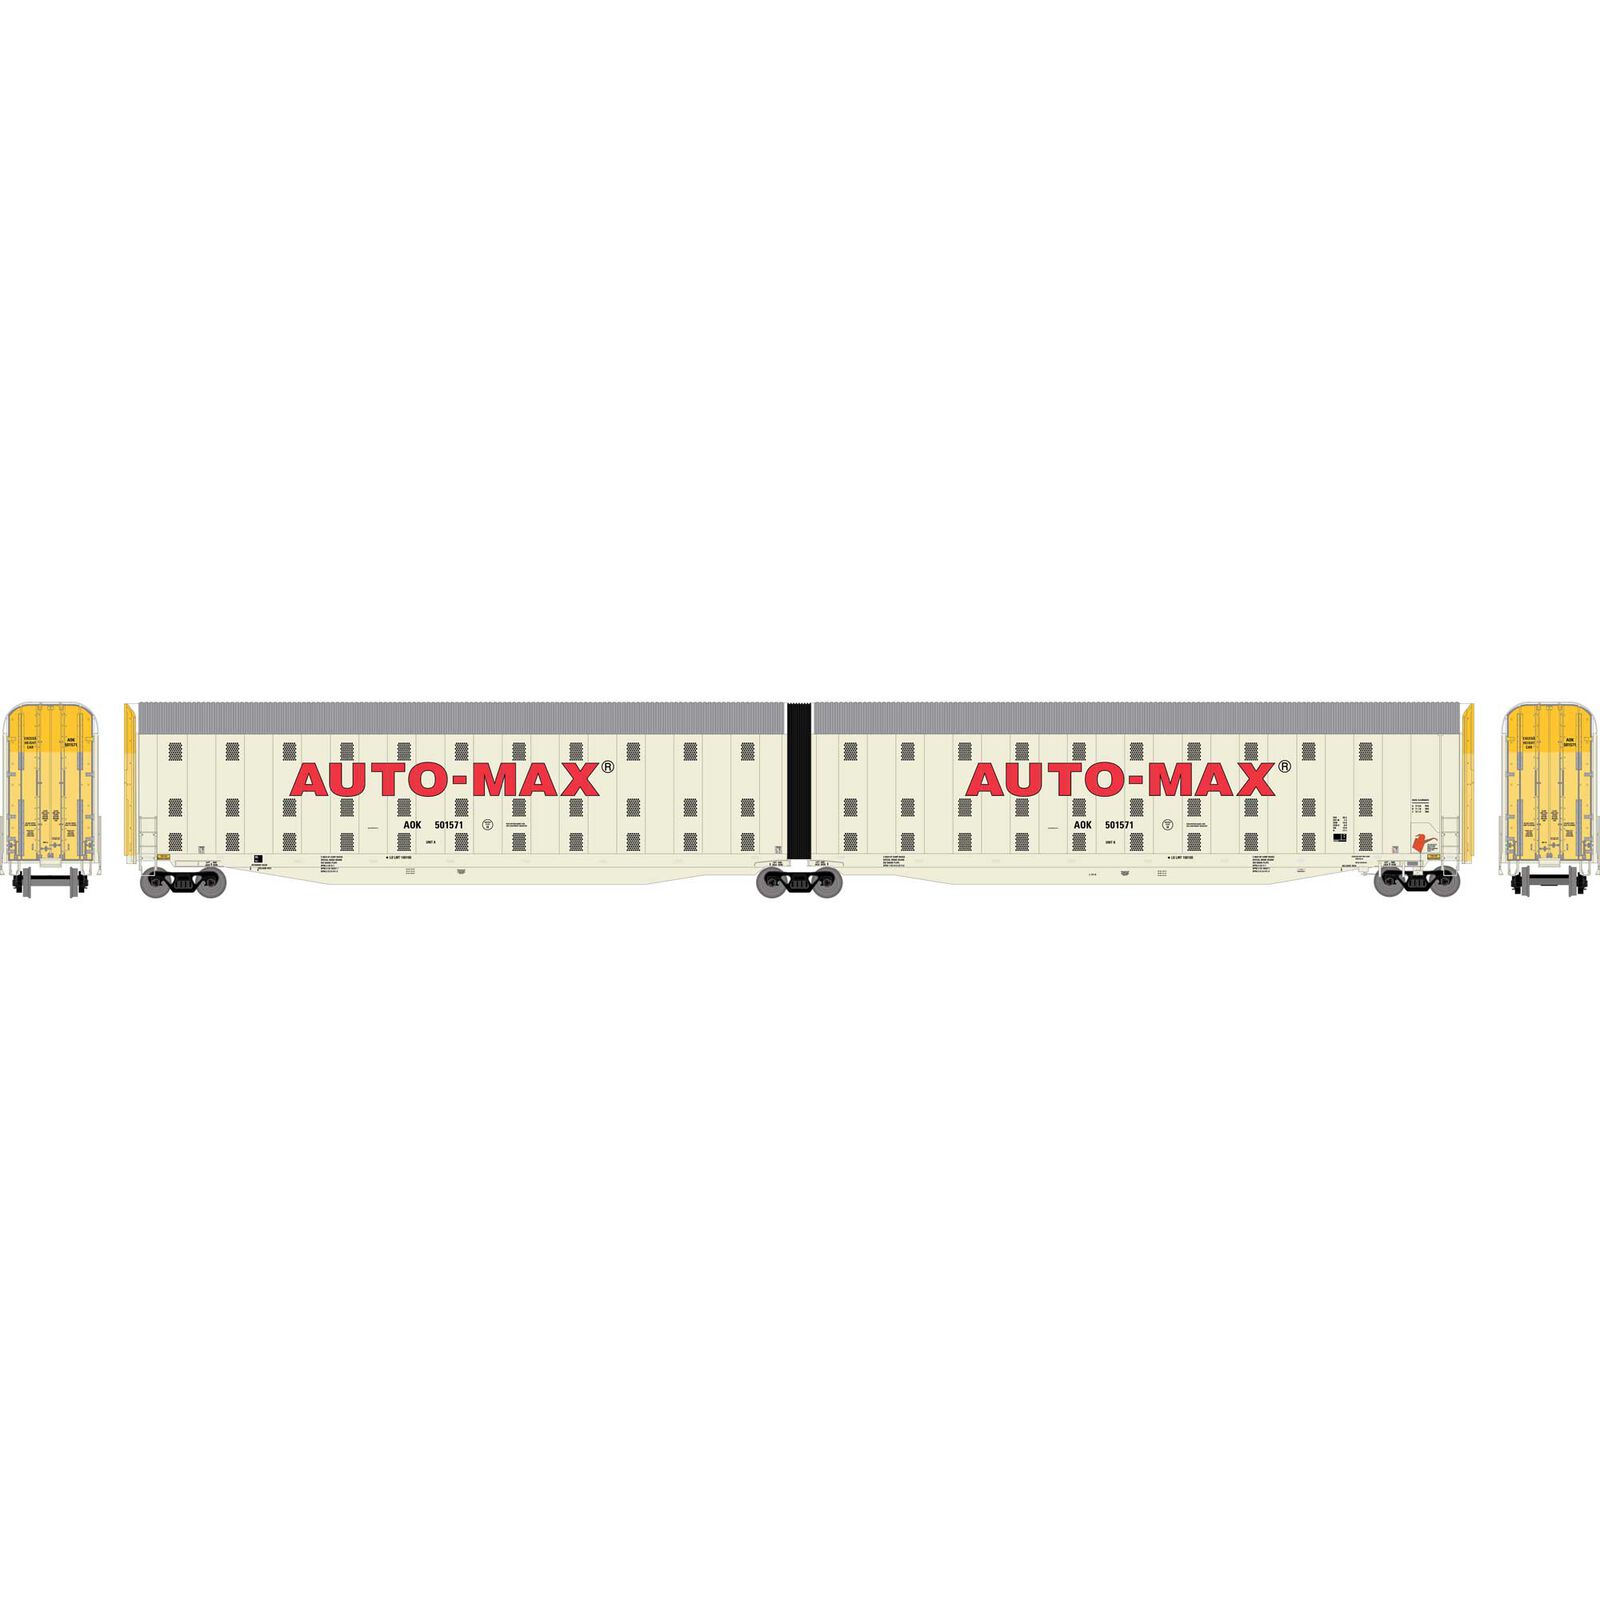 N Auto-Max Carrier, AOK #501571